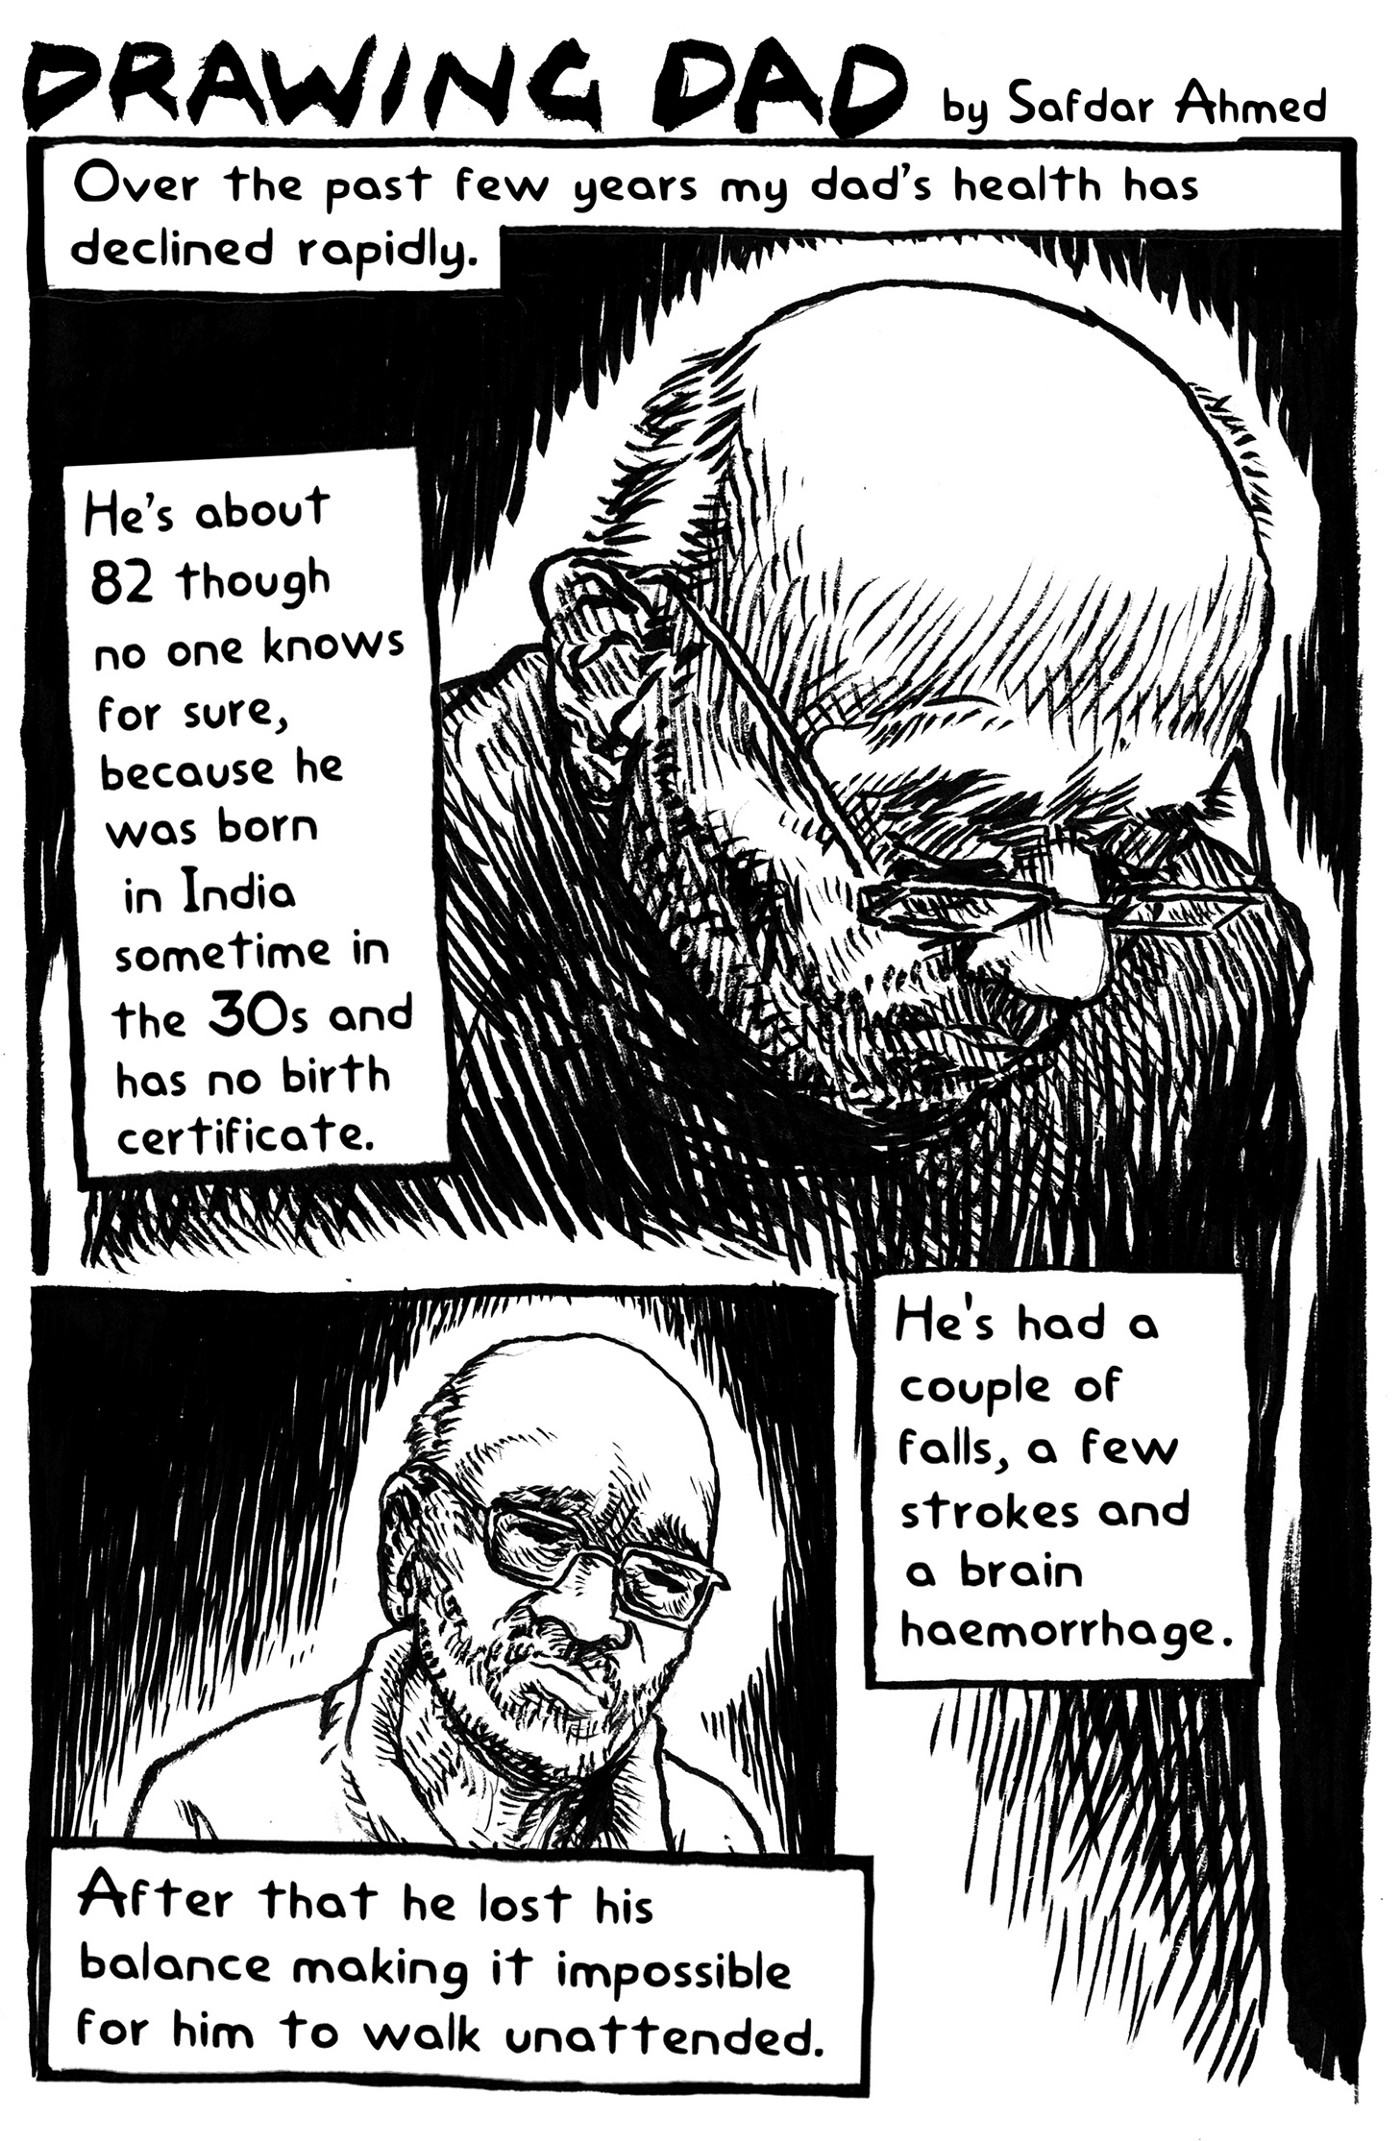 A black and white comic-strip panel with portraits of the author’s father. Text reads: He’s about 82, though no one knows for sure because he was born in India sometime in the 30s and has no birth certificate.’ ‘He’s had a couple of strokes, a few falls and a brain haemorrhage.’ ‘After that, he lost his balance, making it impossible for him to walk unattended.’